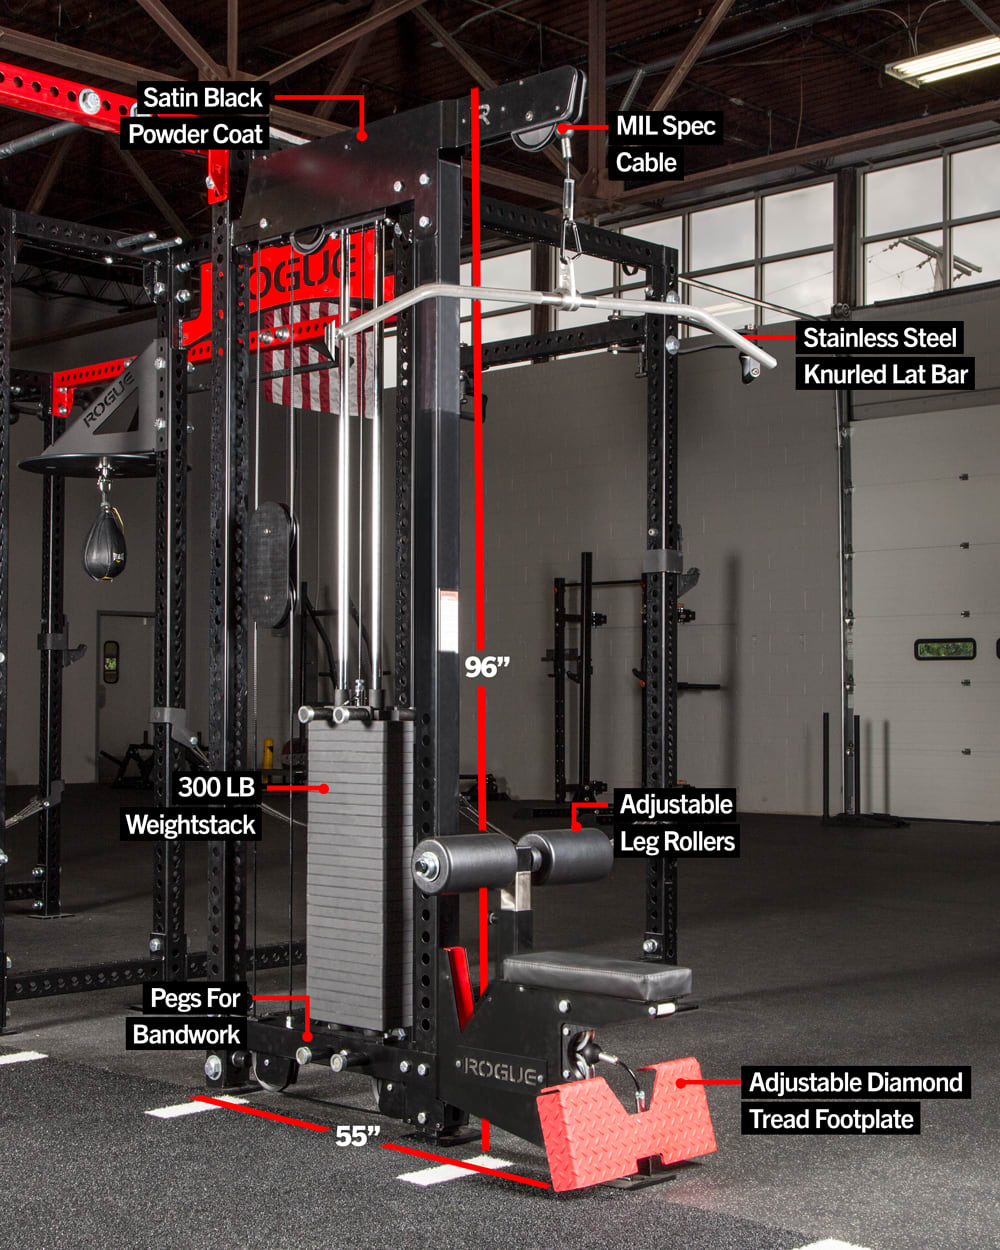 Tricep Extensions Tricep Pull Downs And All Cable Machine Exercises K-Sport Wall Mounted Pulley Lat Station Cable Machine Perfect For Lat Pull Downs The Ultimate Piece Of Home Gym Equipment 